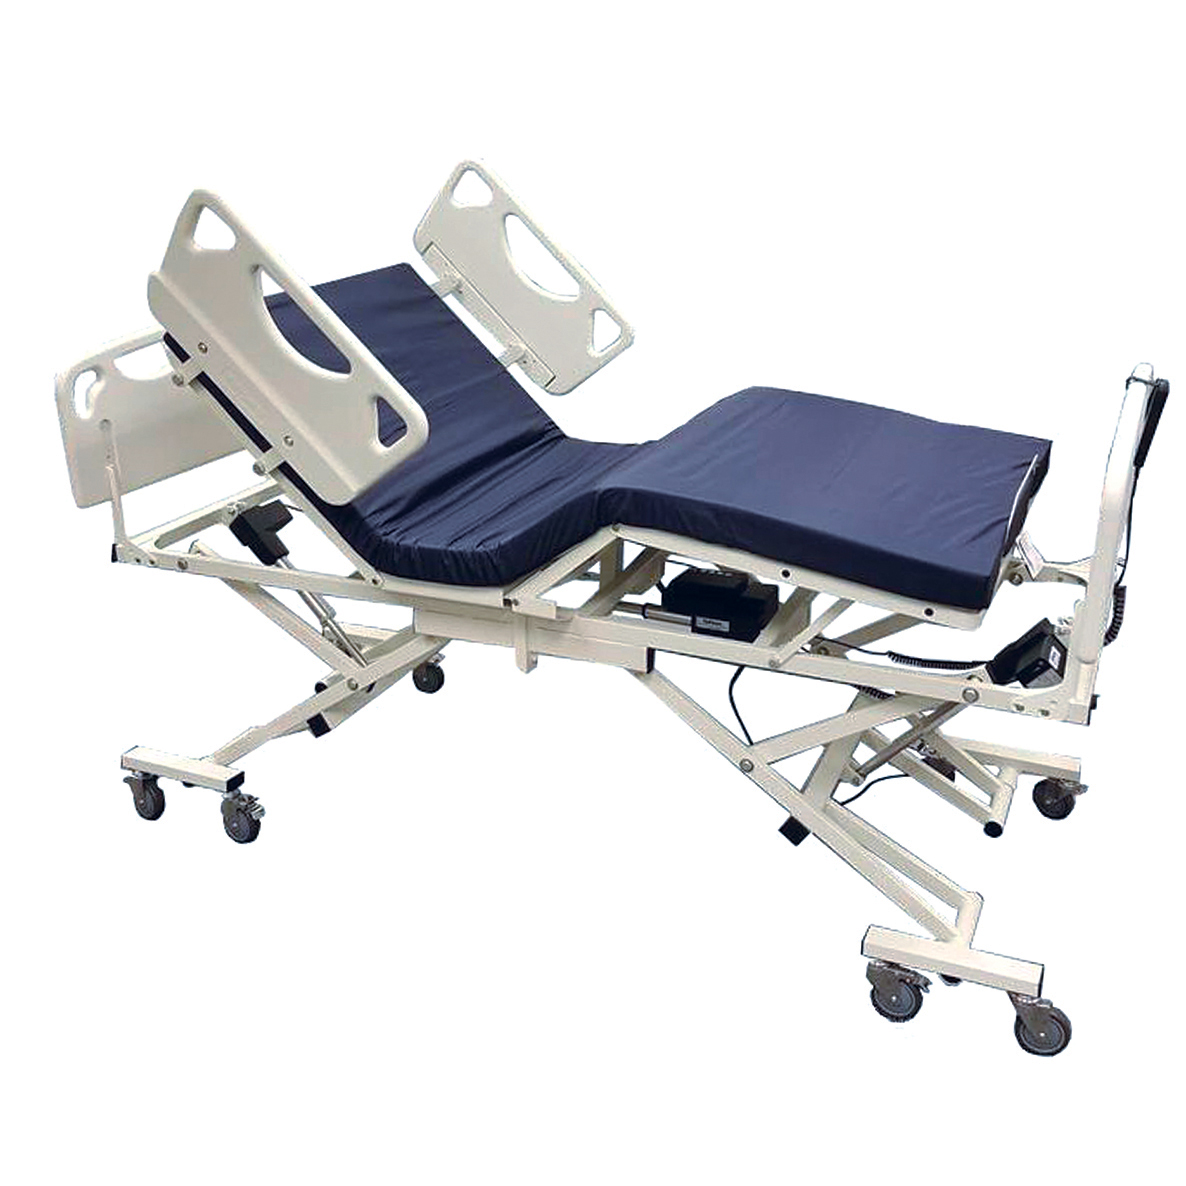 Placentia heavy duty extra wide large bariatric adjustable hospital bed